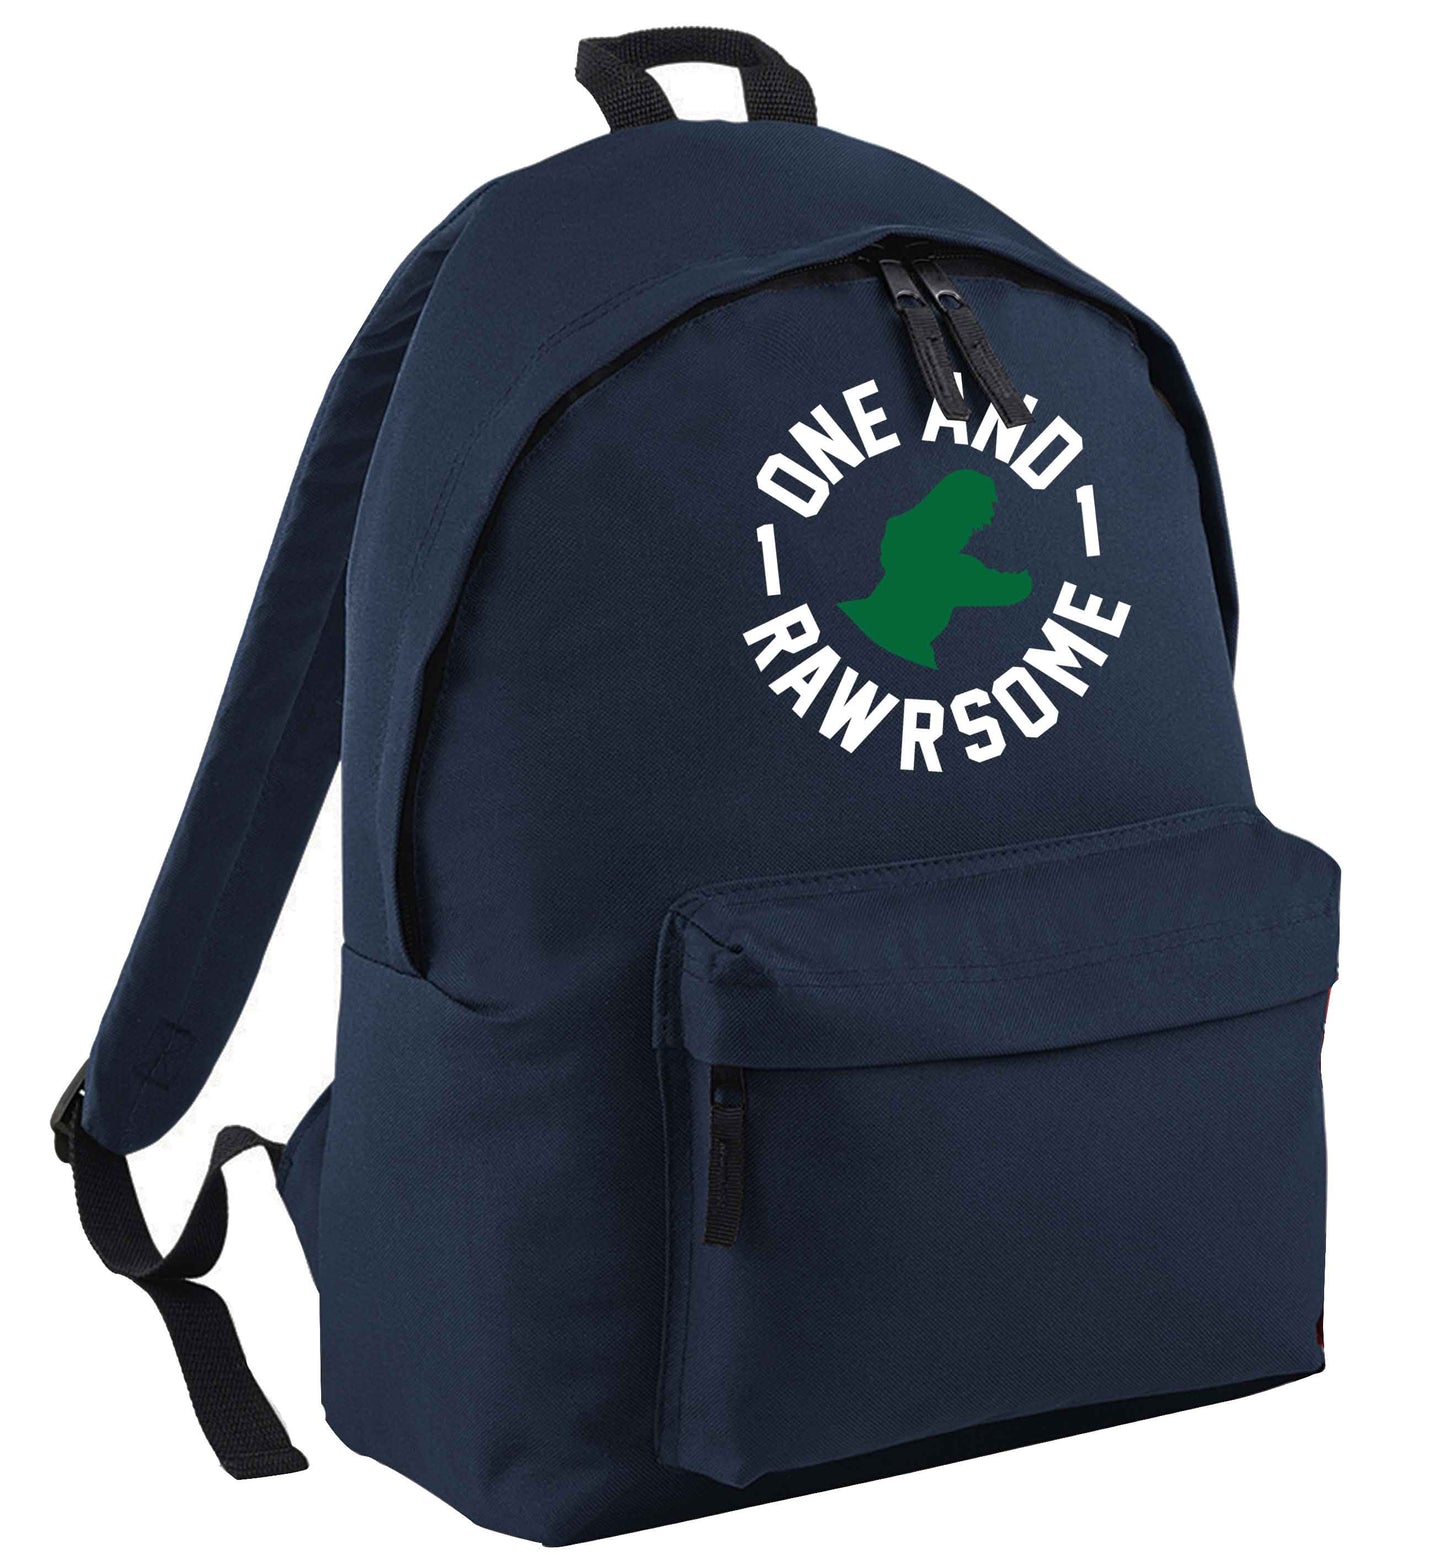 One and Rawrsome navy childrens backpack